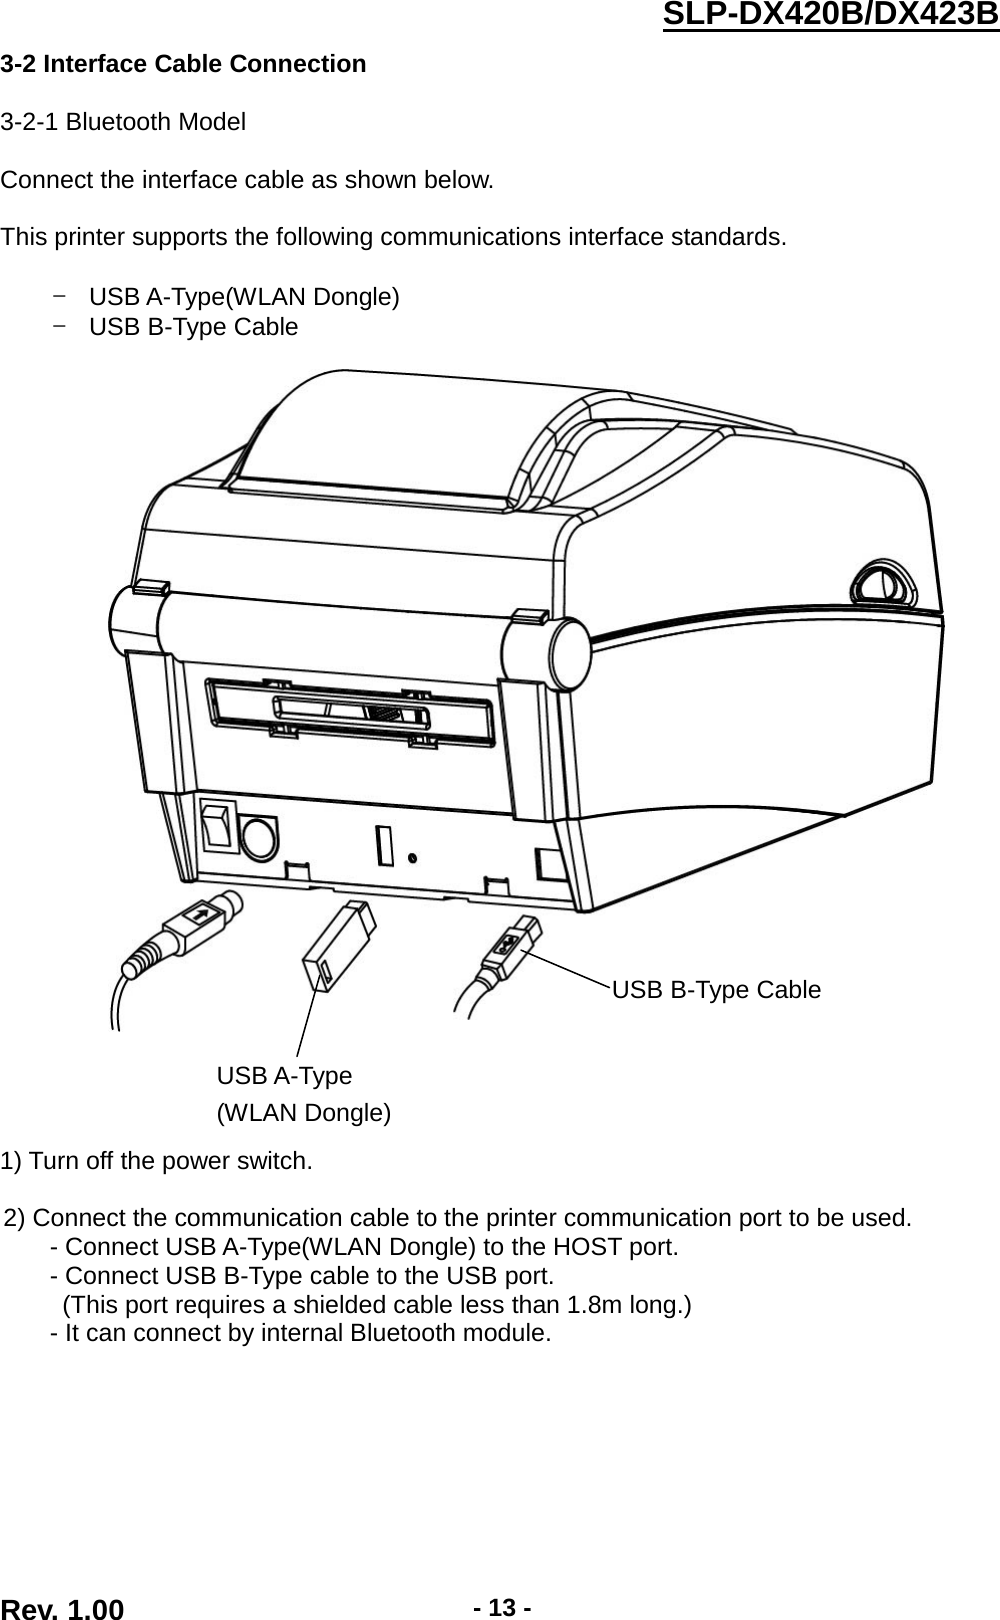  Rev. 1.00 - 13 - SLP-DX420B/DX423B  3-2 Interface Cable Connection  3-2-1 Bluetooth Model  Connect the interface cable as shown below.  This printer supports the following communications interface standards.  - USB A-Type(WLAN Dongle) - USB B-Type Cable            1) Turn off the power switch.  2) Connect the communication cable to the printer communication port to be used. - Connect USB A-Type(WLAN Dongle) to the HOST port. - Connect USB B-Type cable to the USB port. (This port requires a shielded cable less than 1.8m long.) - It can connect by internal Bluetooth module.         USB A-Type (WLAN Dongle)  USB B-Type Cable 